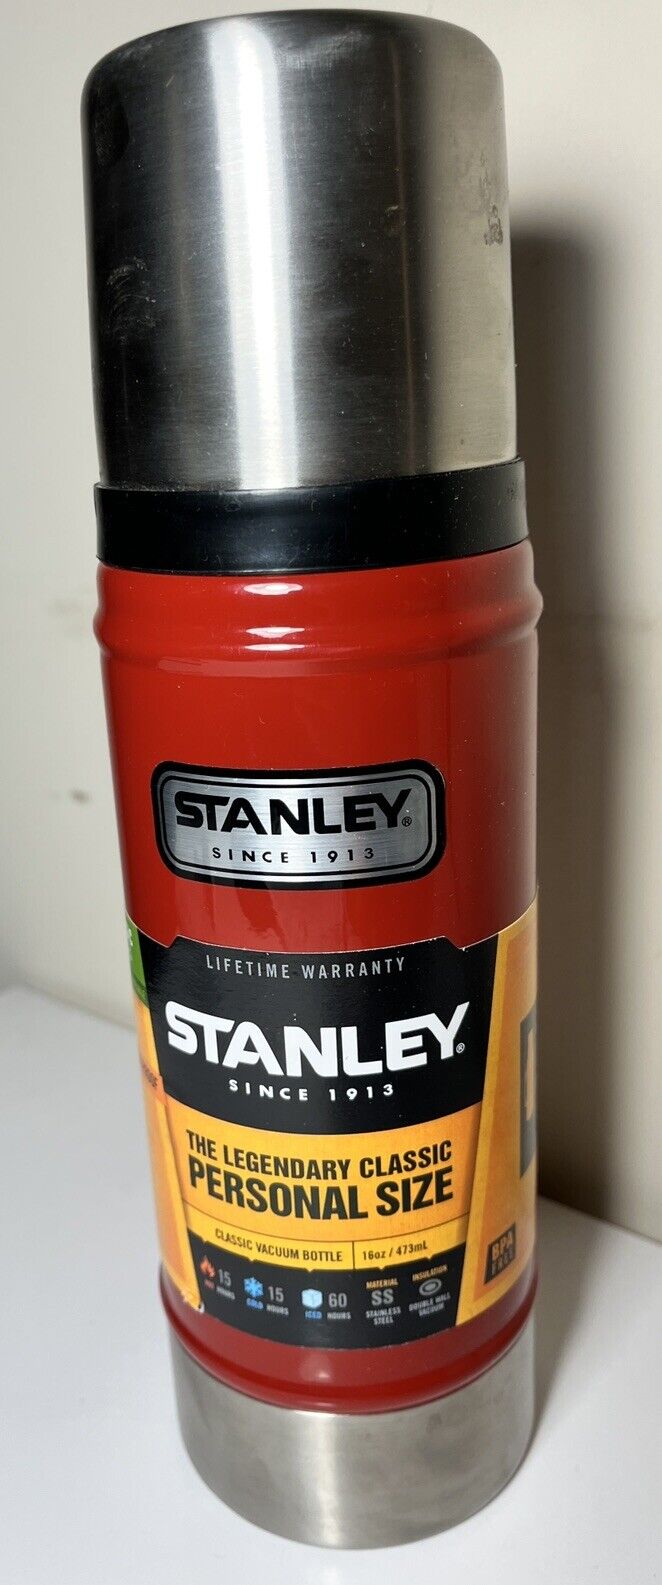 New* Stanley Legendary Classic Personal Size 16oz Vacuum Bottle RED Stainless